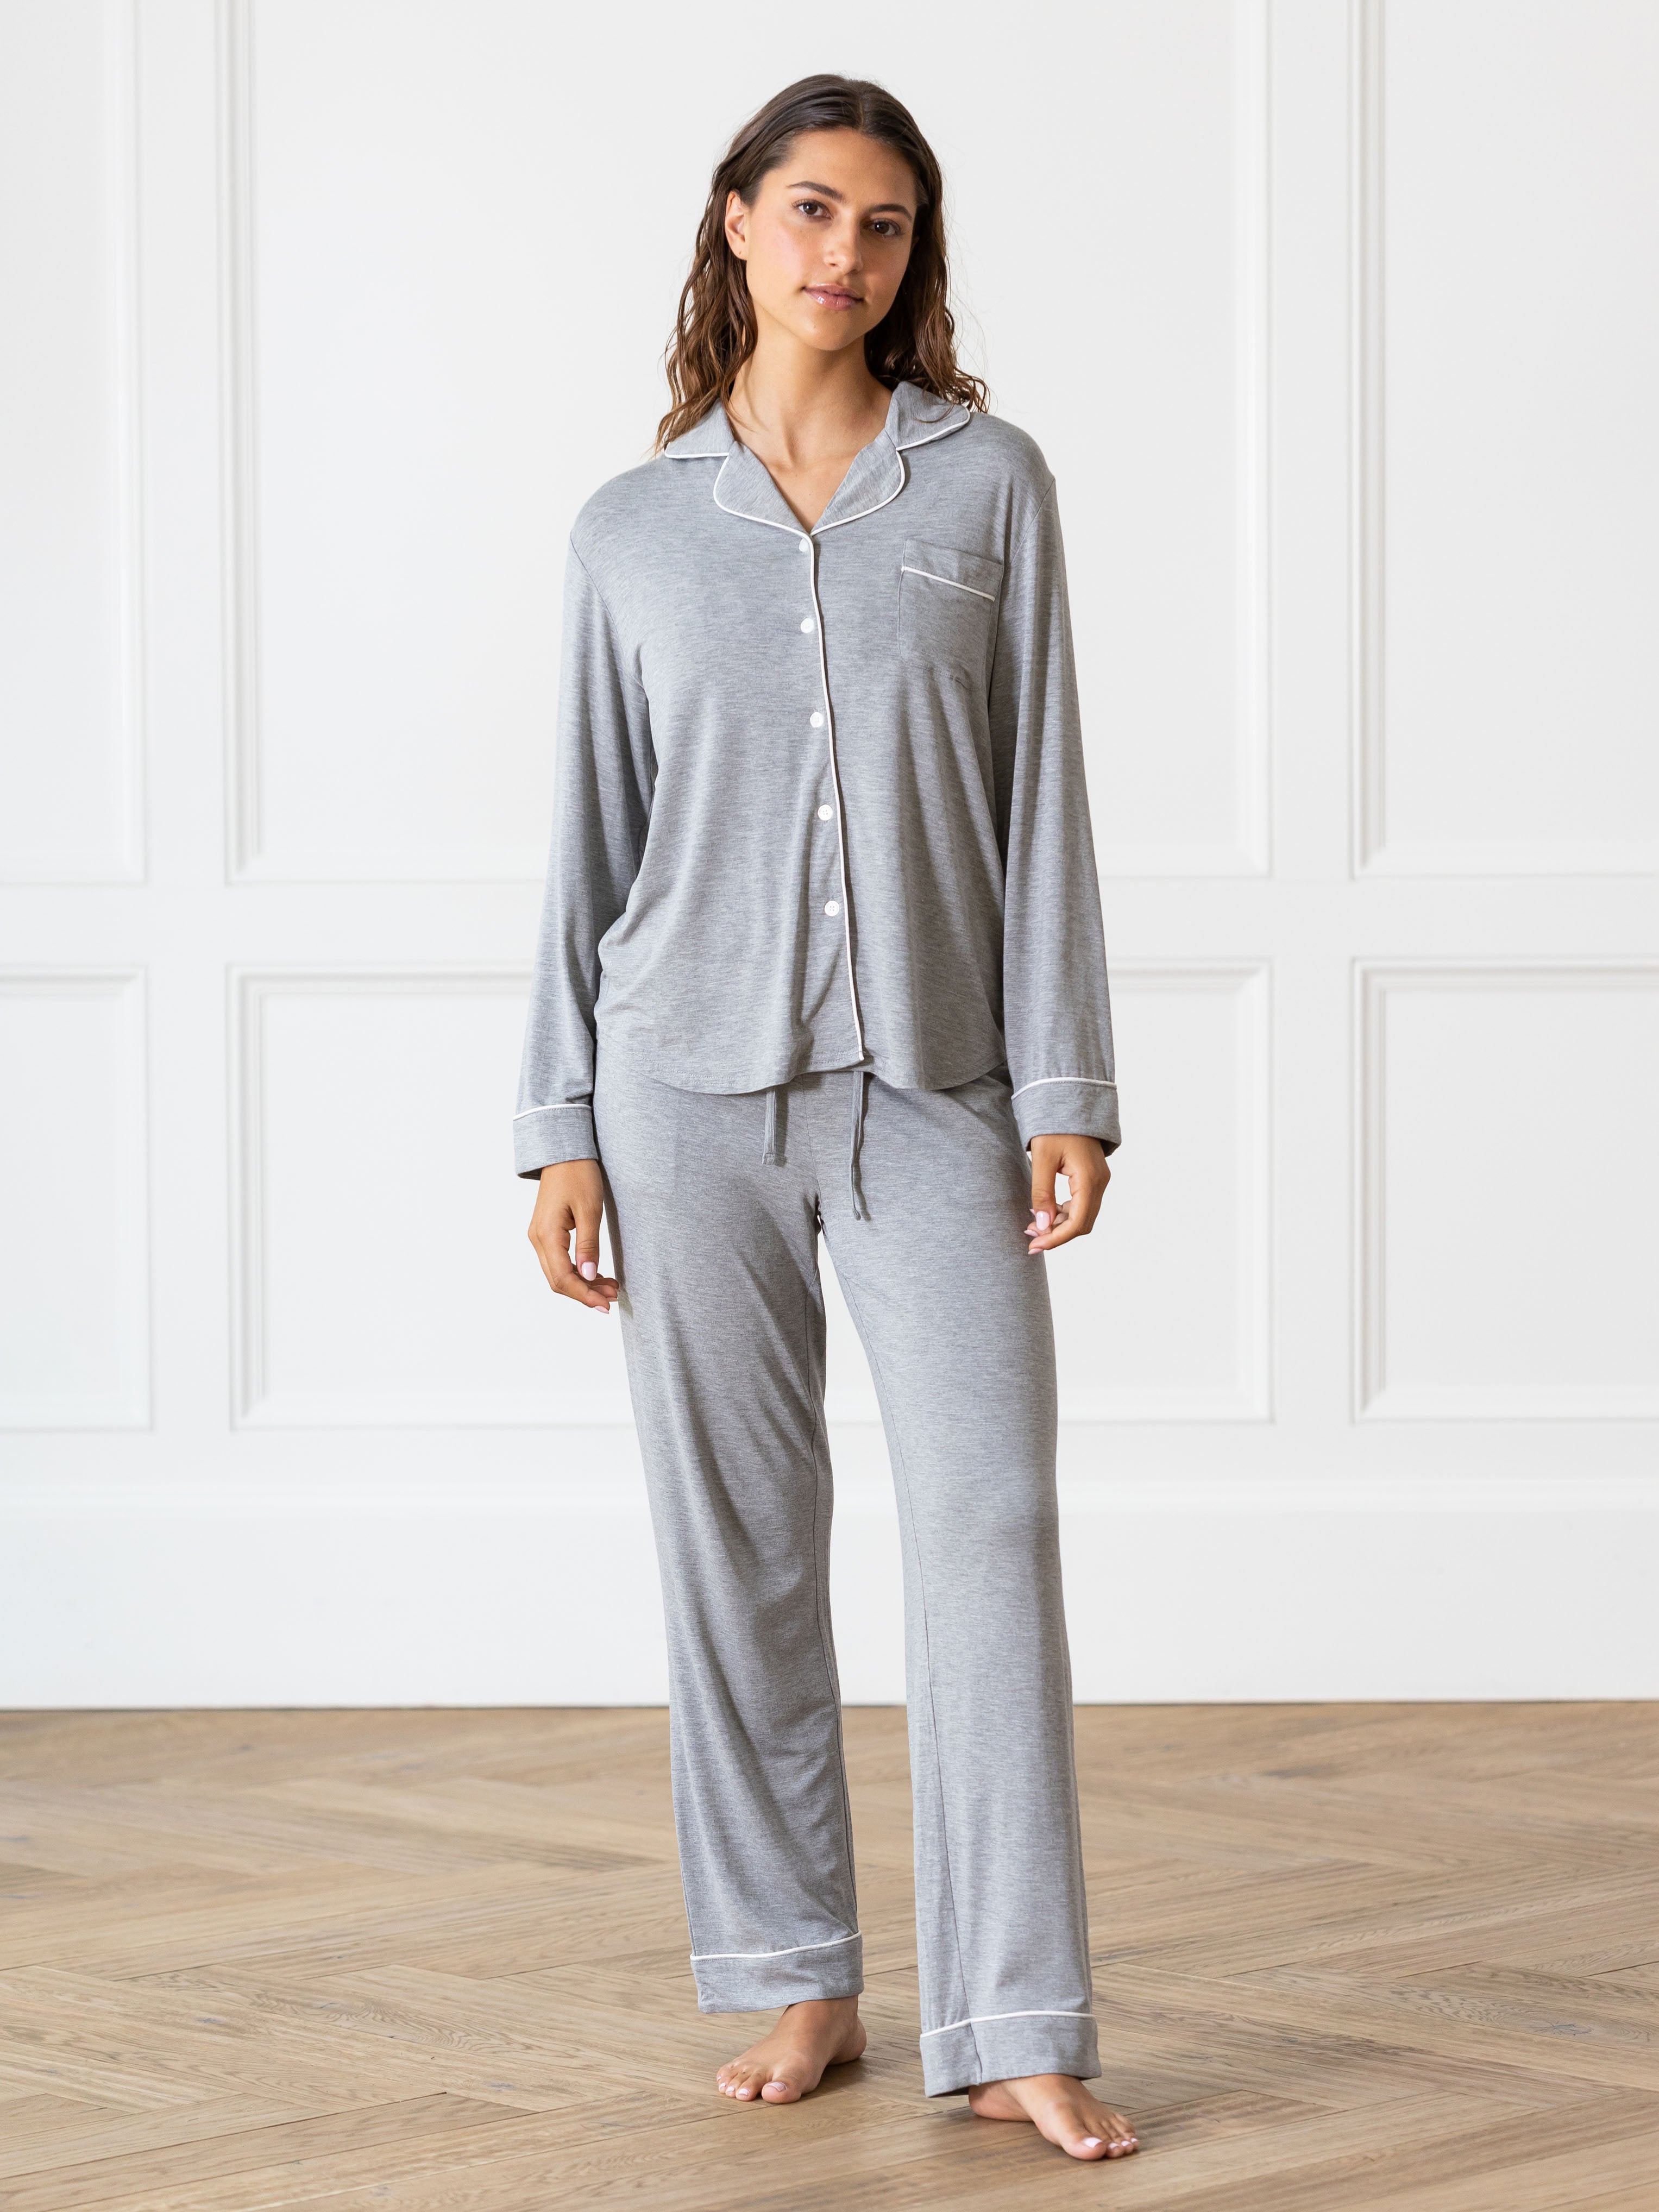 Grey Long Sleeve Pajama Set modeled by a woman. The photo was taken in a high contrast setting, showing off the colors and lines of the pajamas. |Color:Grey